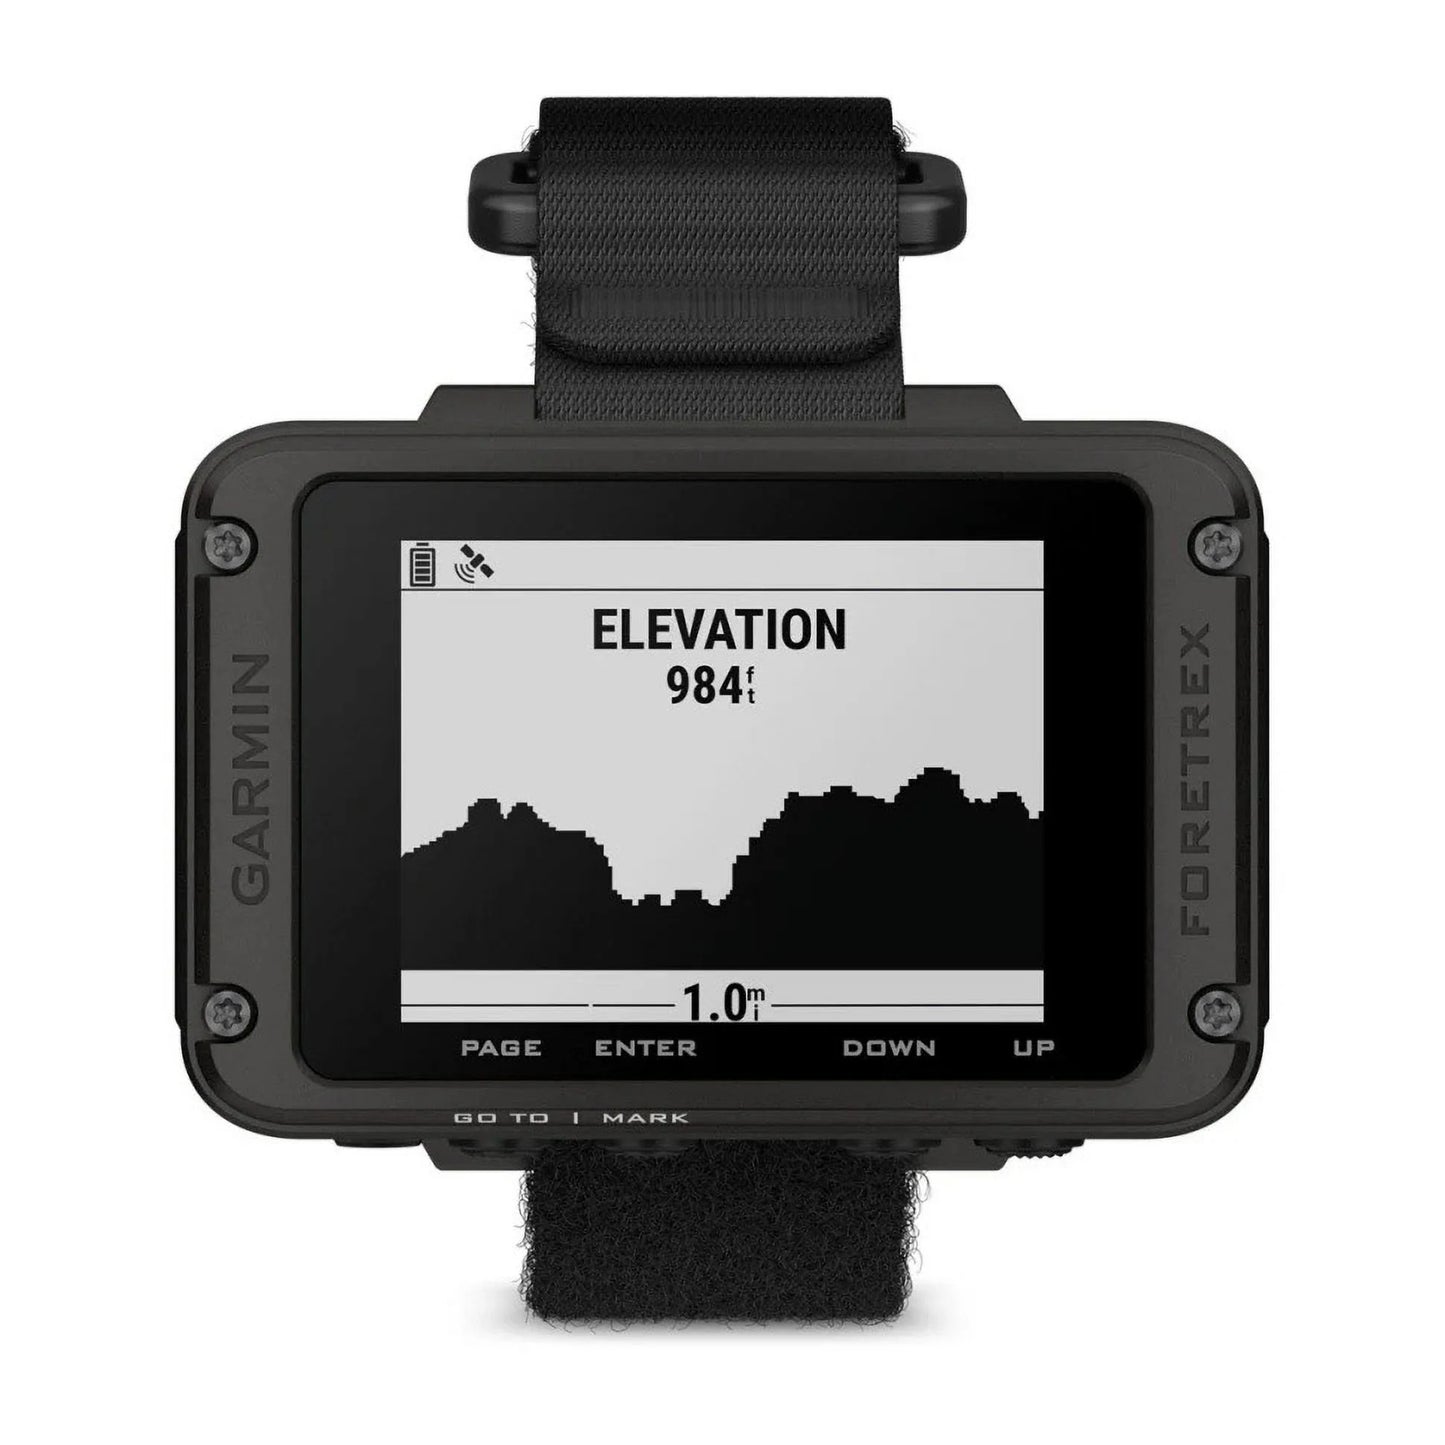 Garmin Foretrex 801 - Wrist-Mounted GPS Navigation with Strap for Hunting, Hiking & Military Men - Tactical Garmin Watch for Outdoor Recreation, Upgraded Multi-Band GNSS and Longer Battery Life